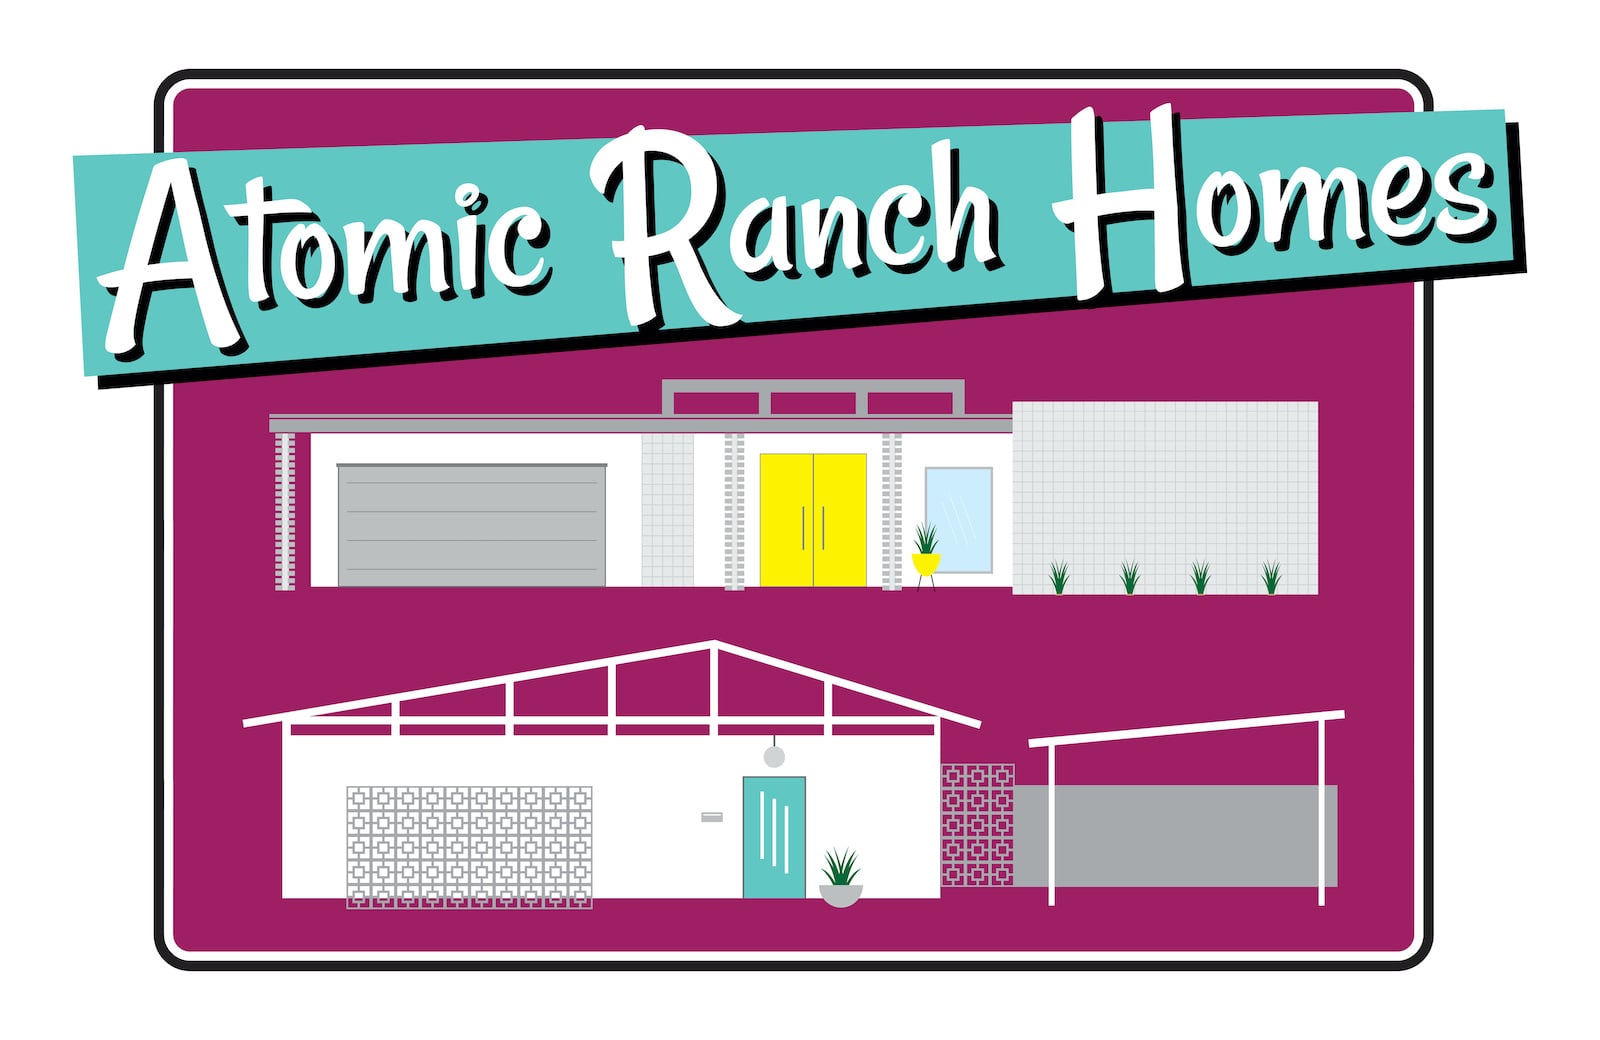 Graphic of Atomic Ranch home sketches